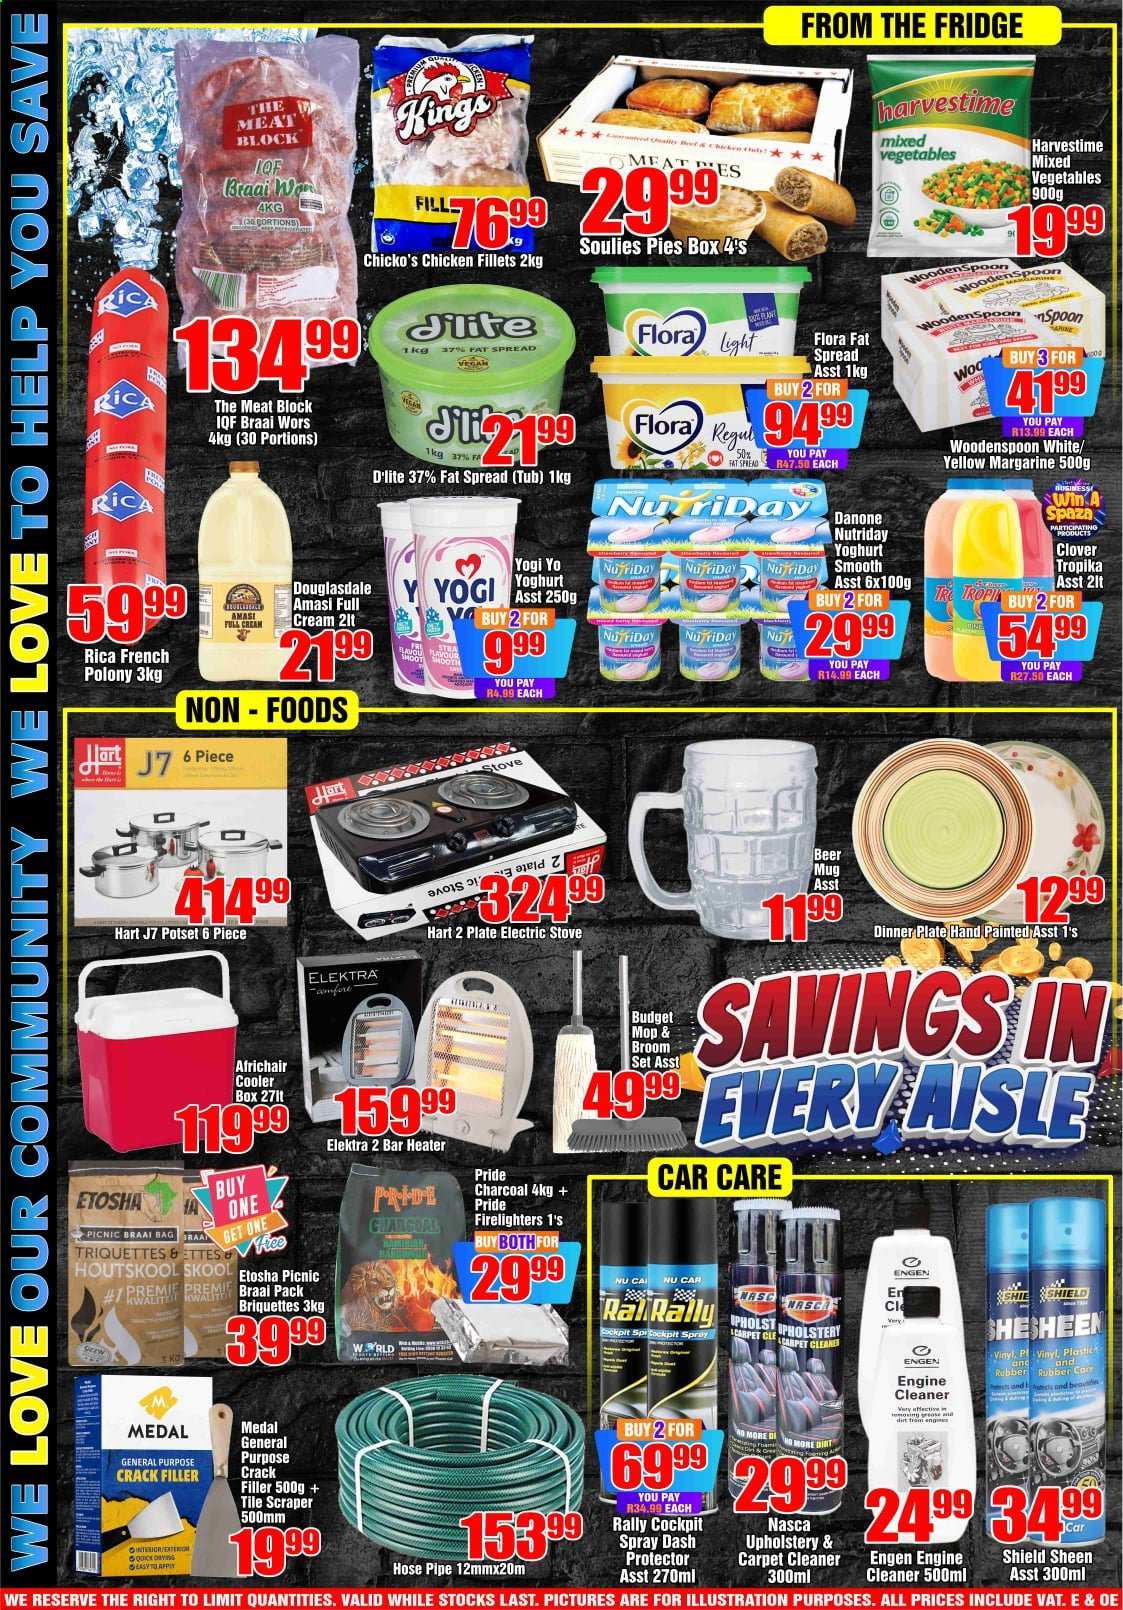 Three Star Cash and Carry specials - 04.22.2021 - 05.08.2021. 